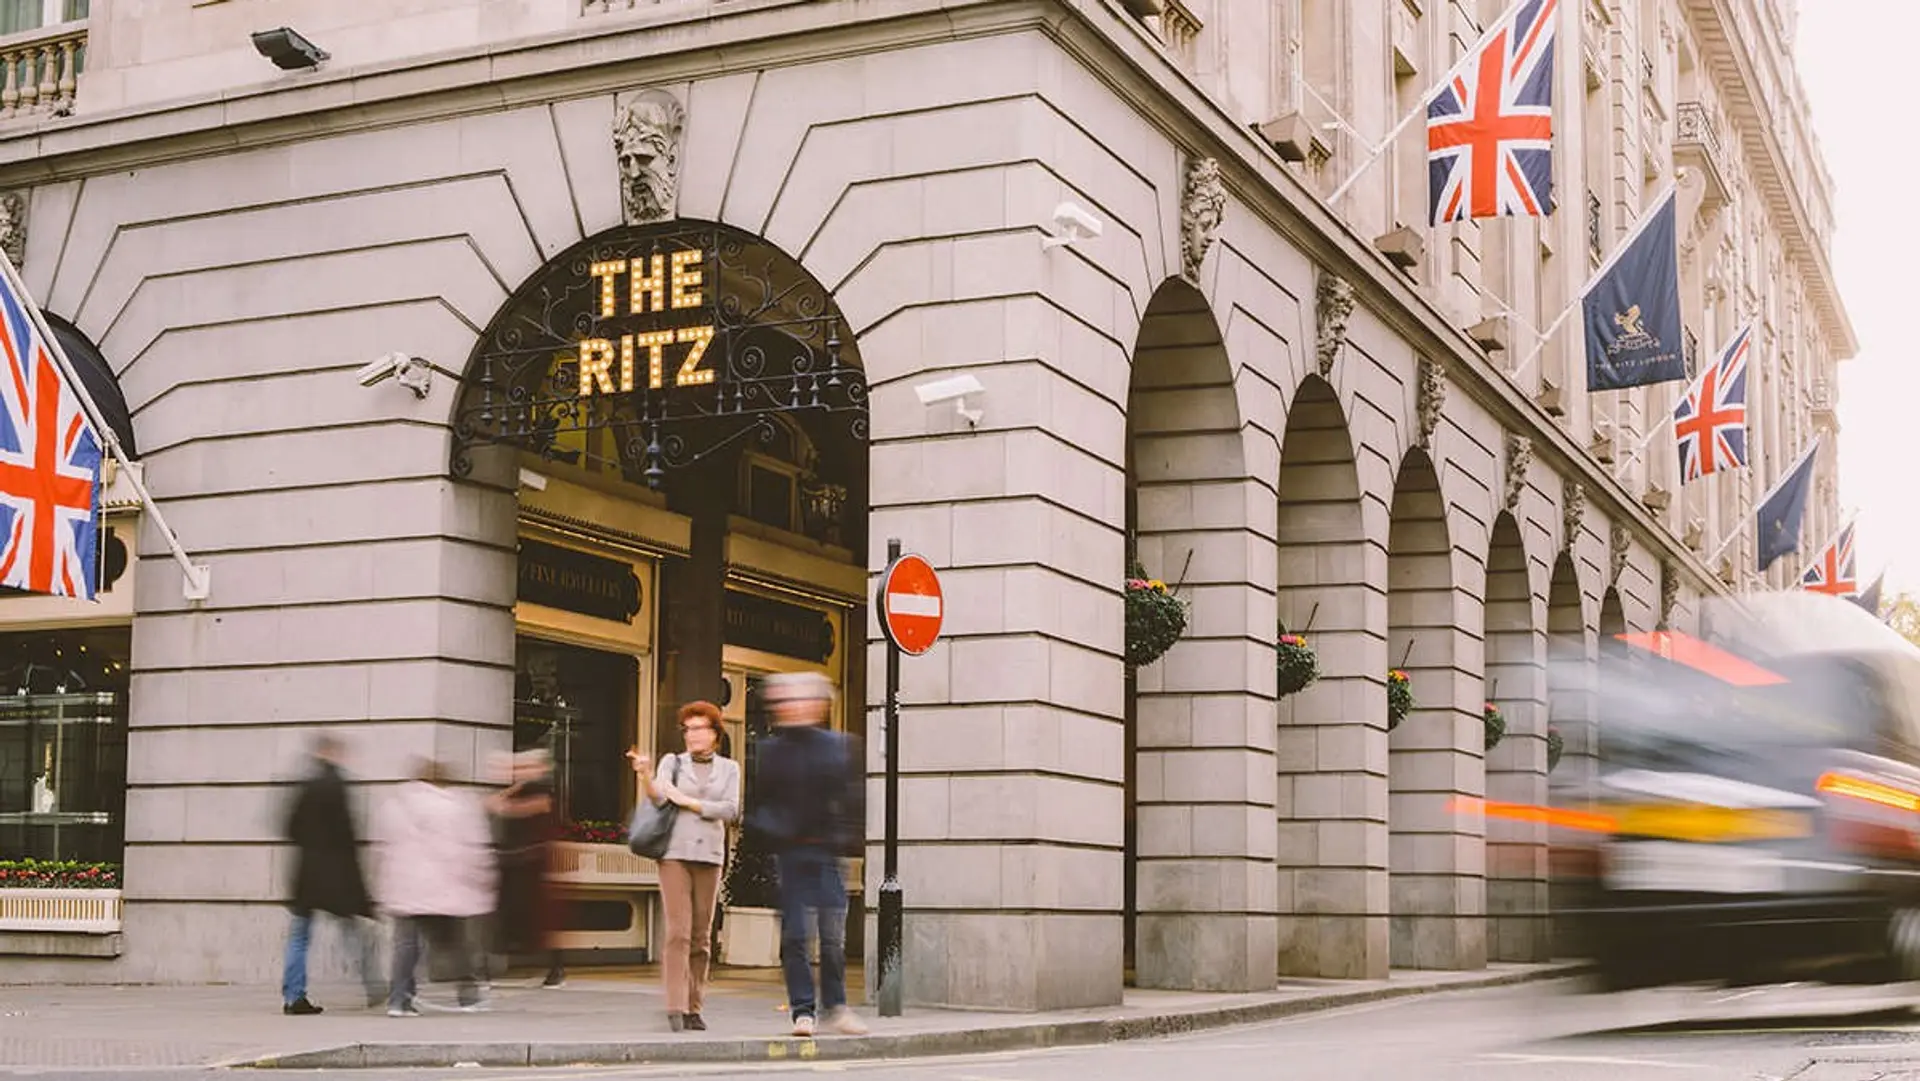 The Ritz hotel at St James's